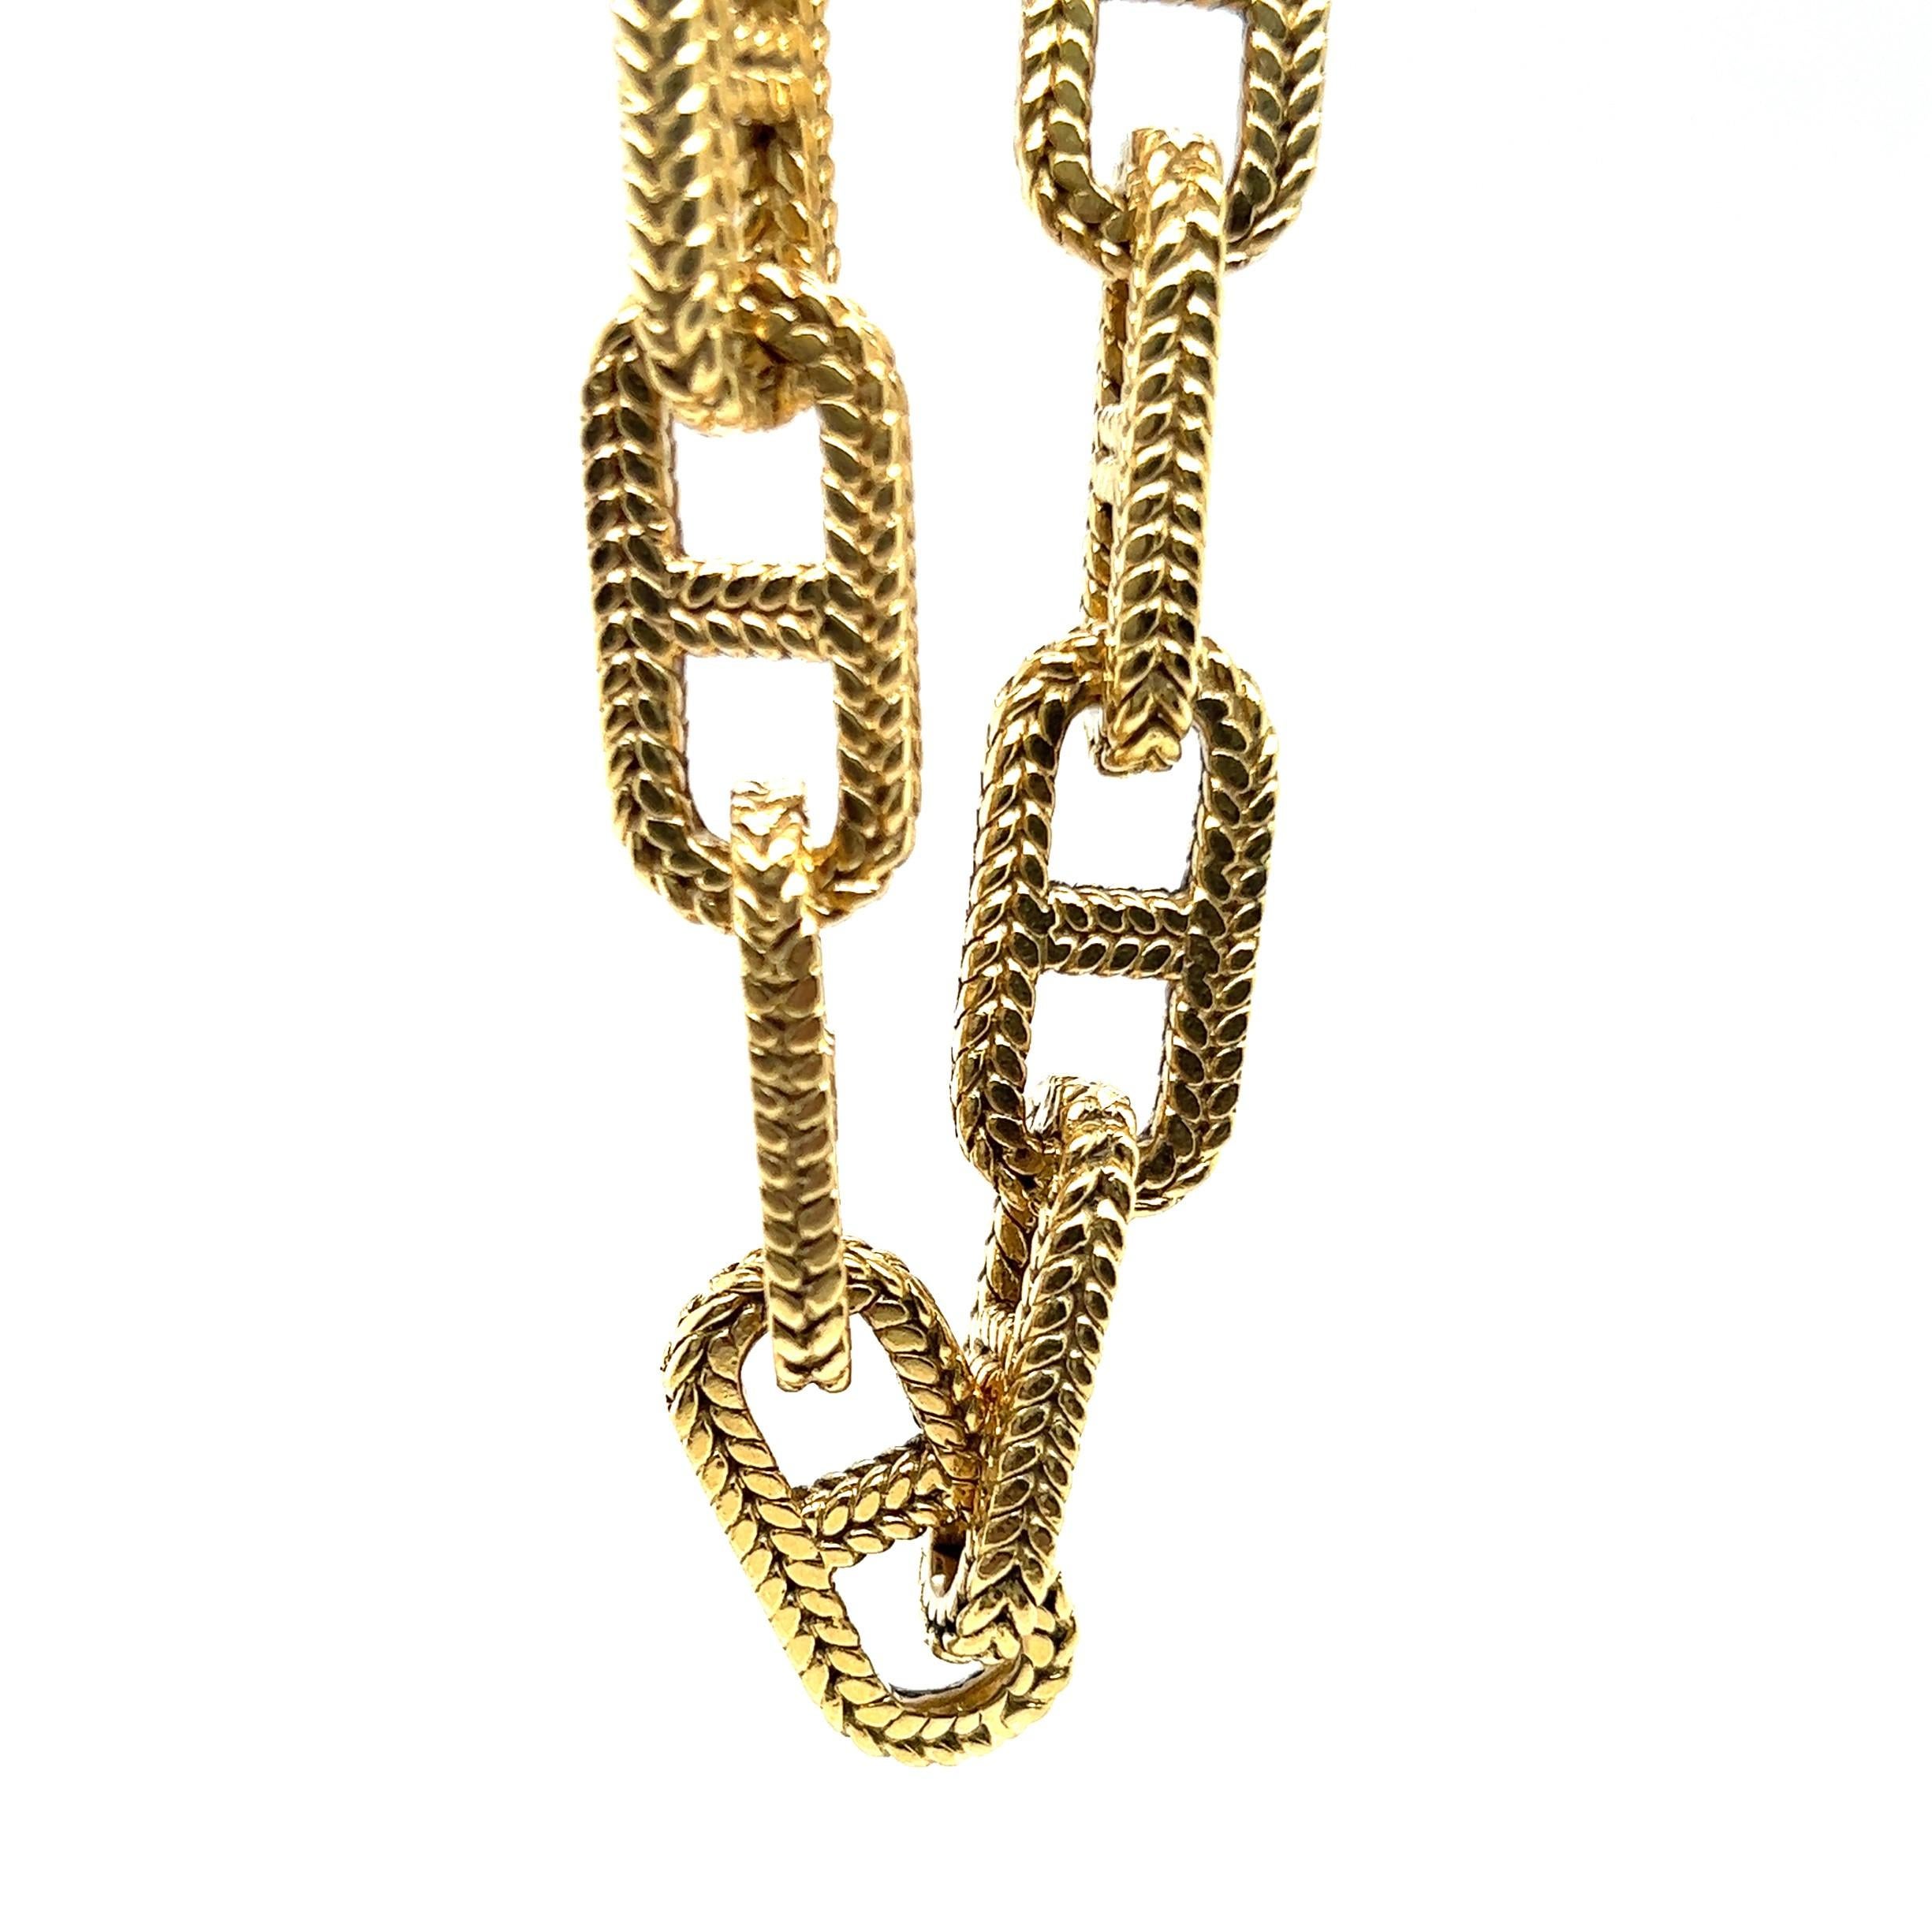 Chain Bracelet “Chaine D'ancre” in 18 Karat Yellow Gold 4